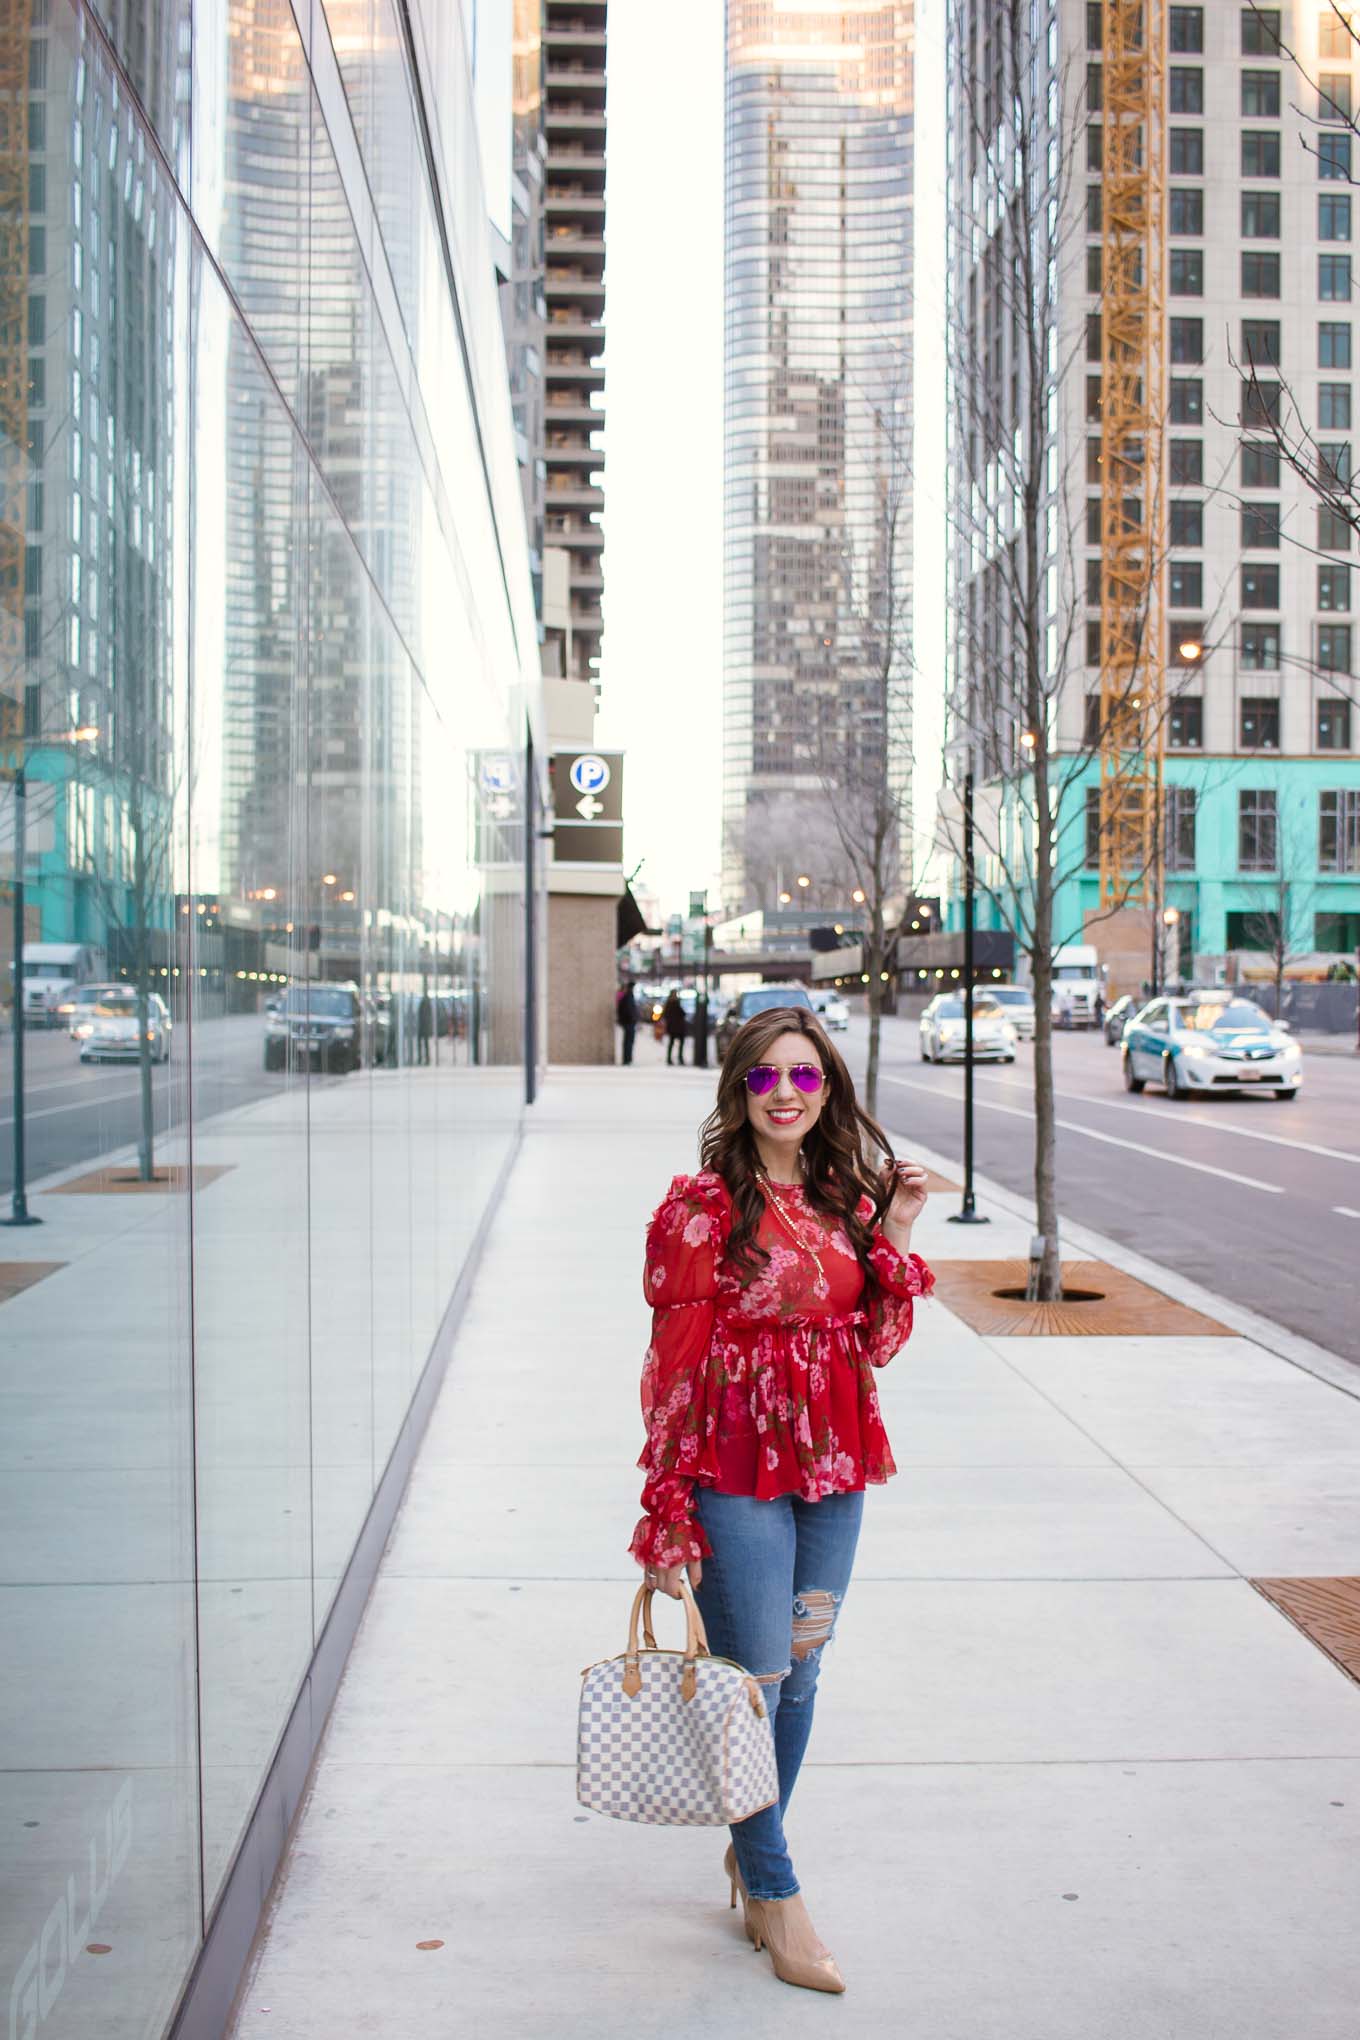 Lifestyle blogger Roxanne of Glass of Glam wearing an Asos ruffle top, Agolde denim, and Sam Edelman pumps